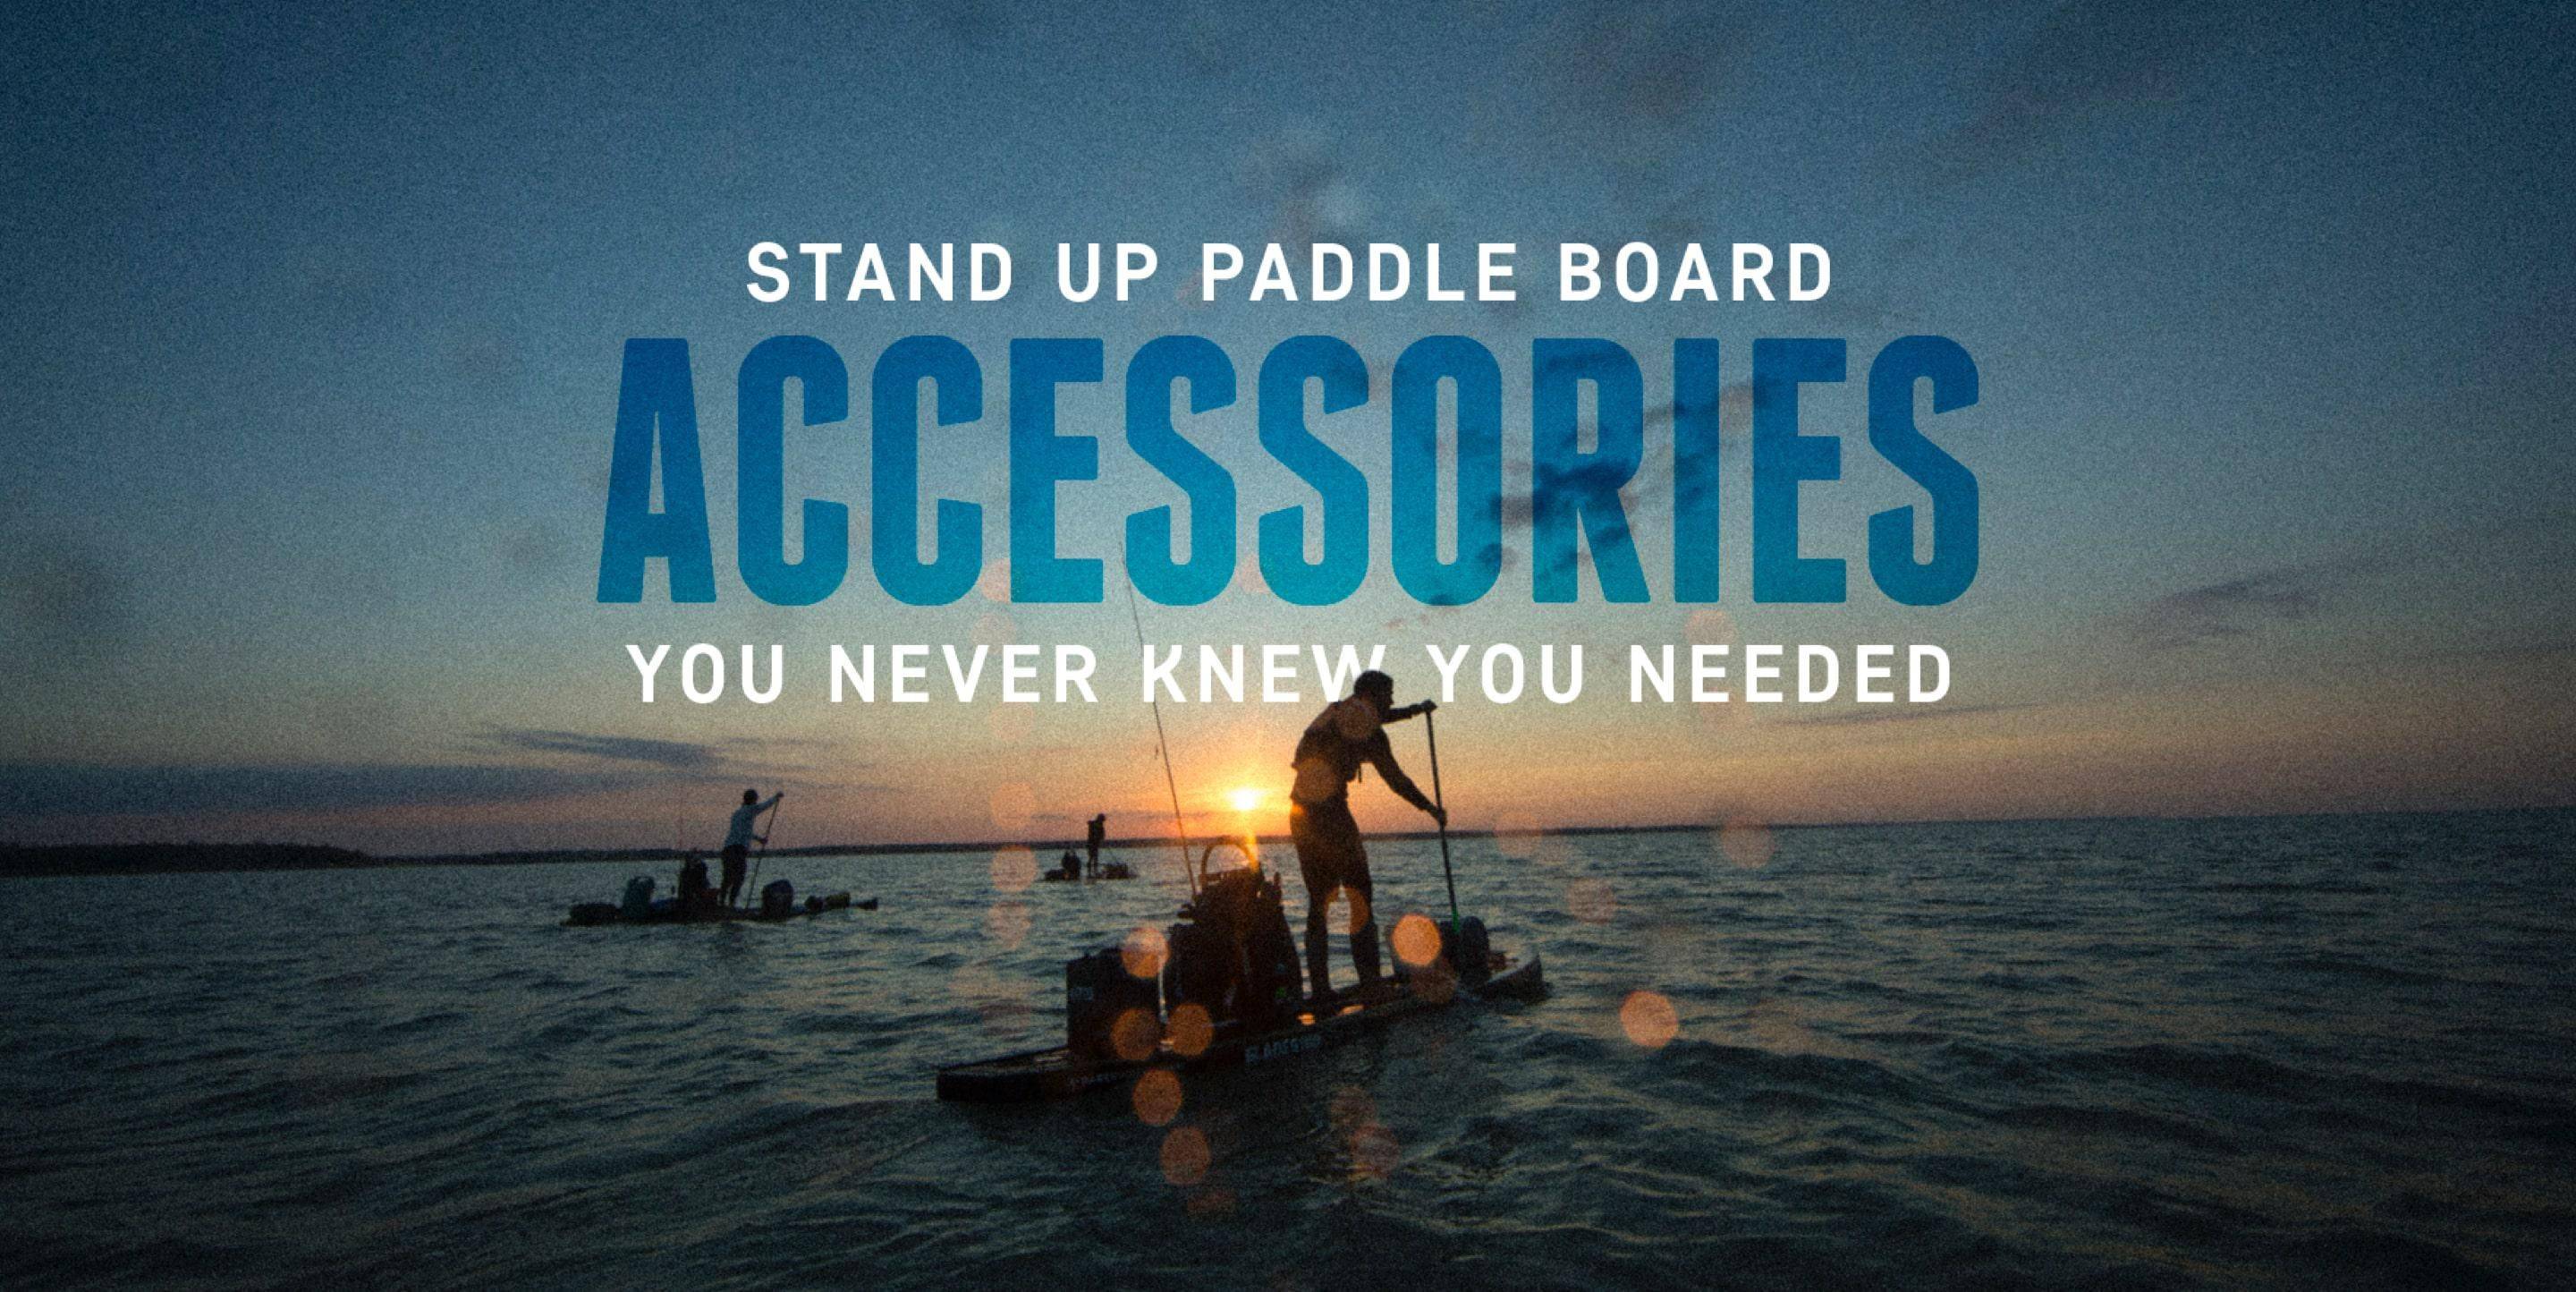 SUP accessories you never knew you needed.